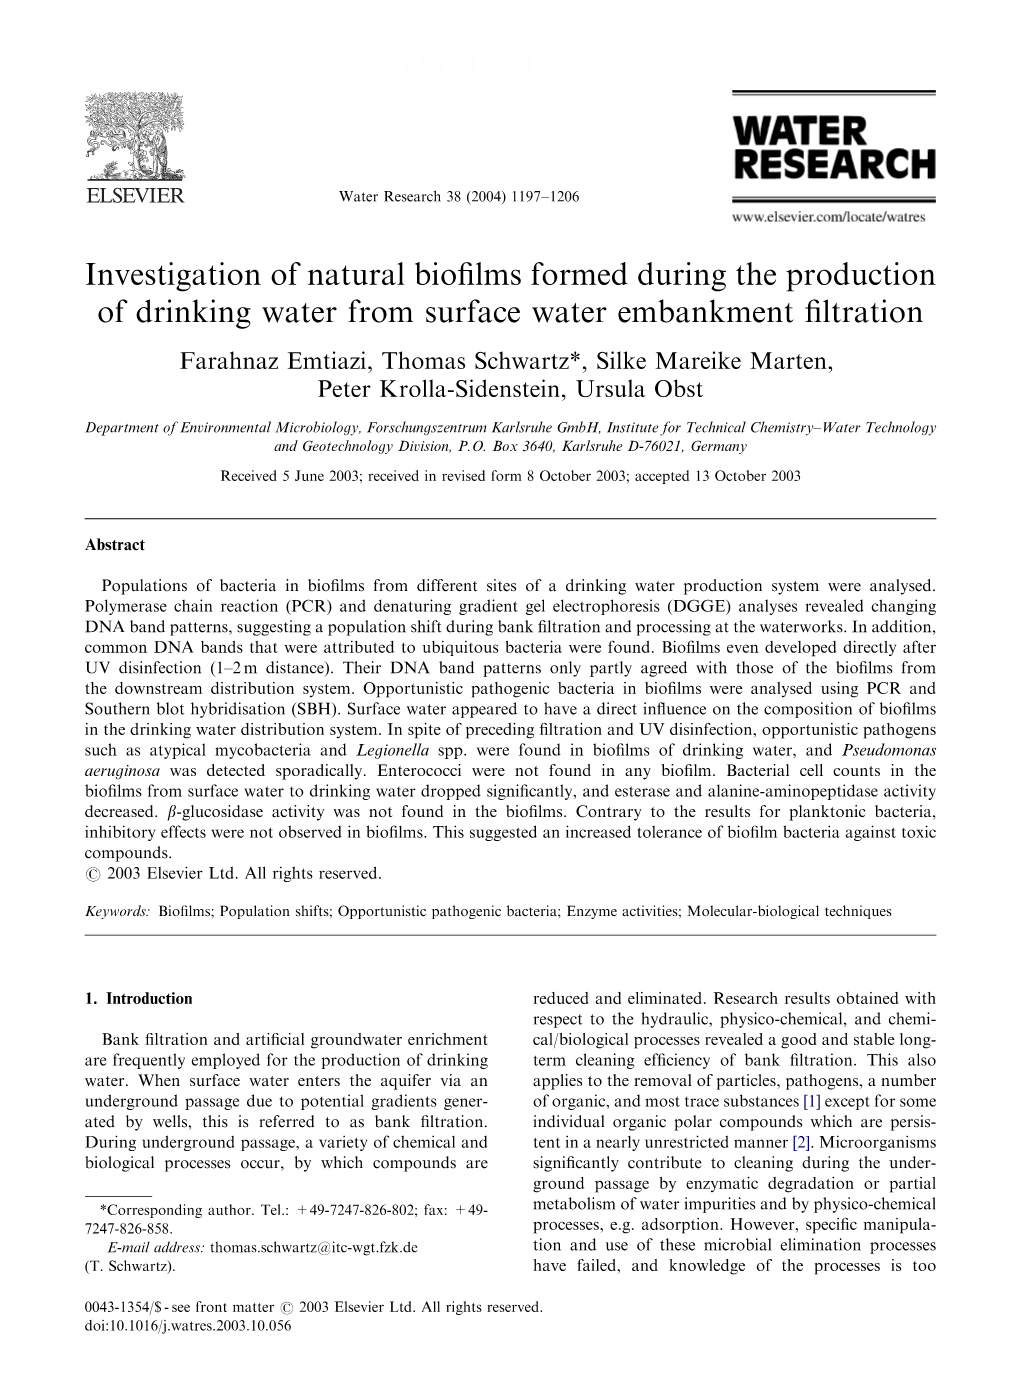 Investigation of Natural Biofilms Formed During the Production of Drinking